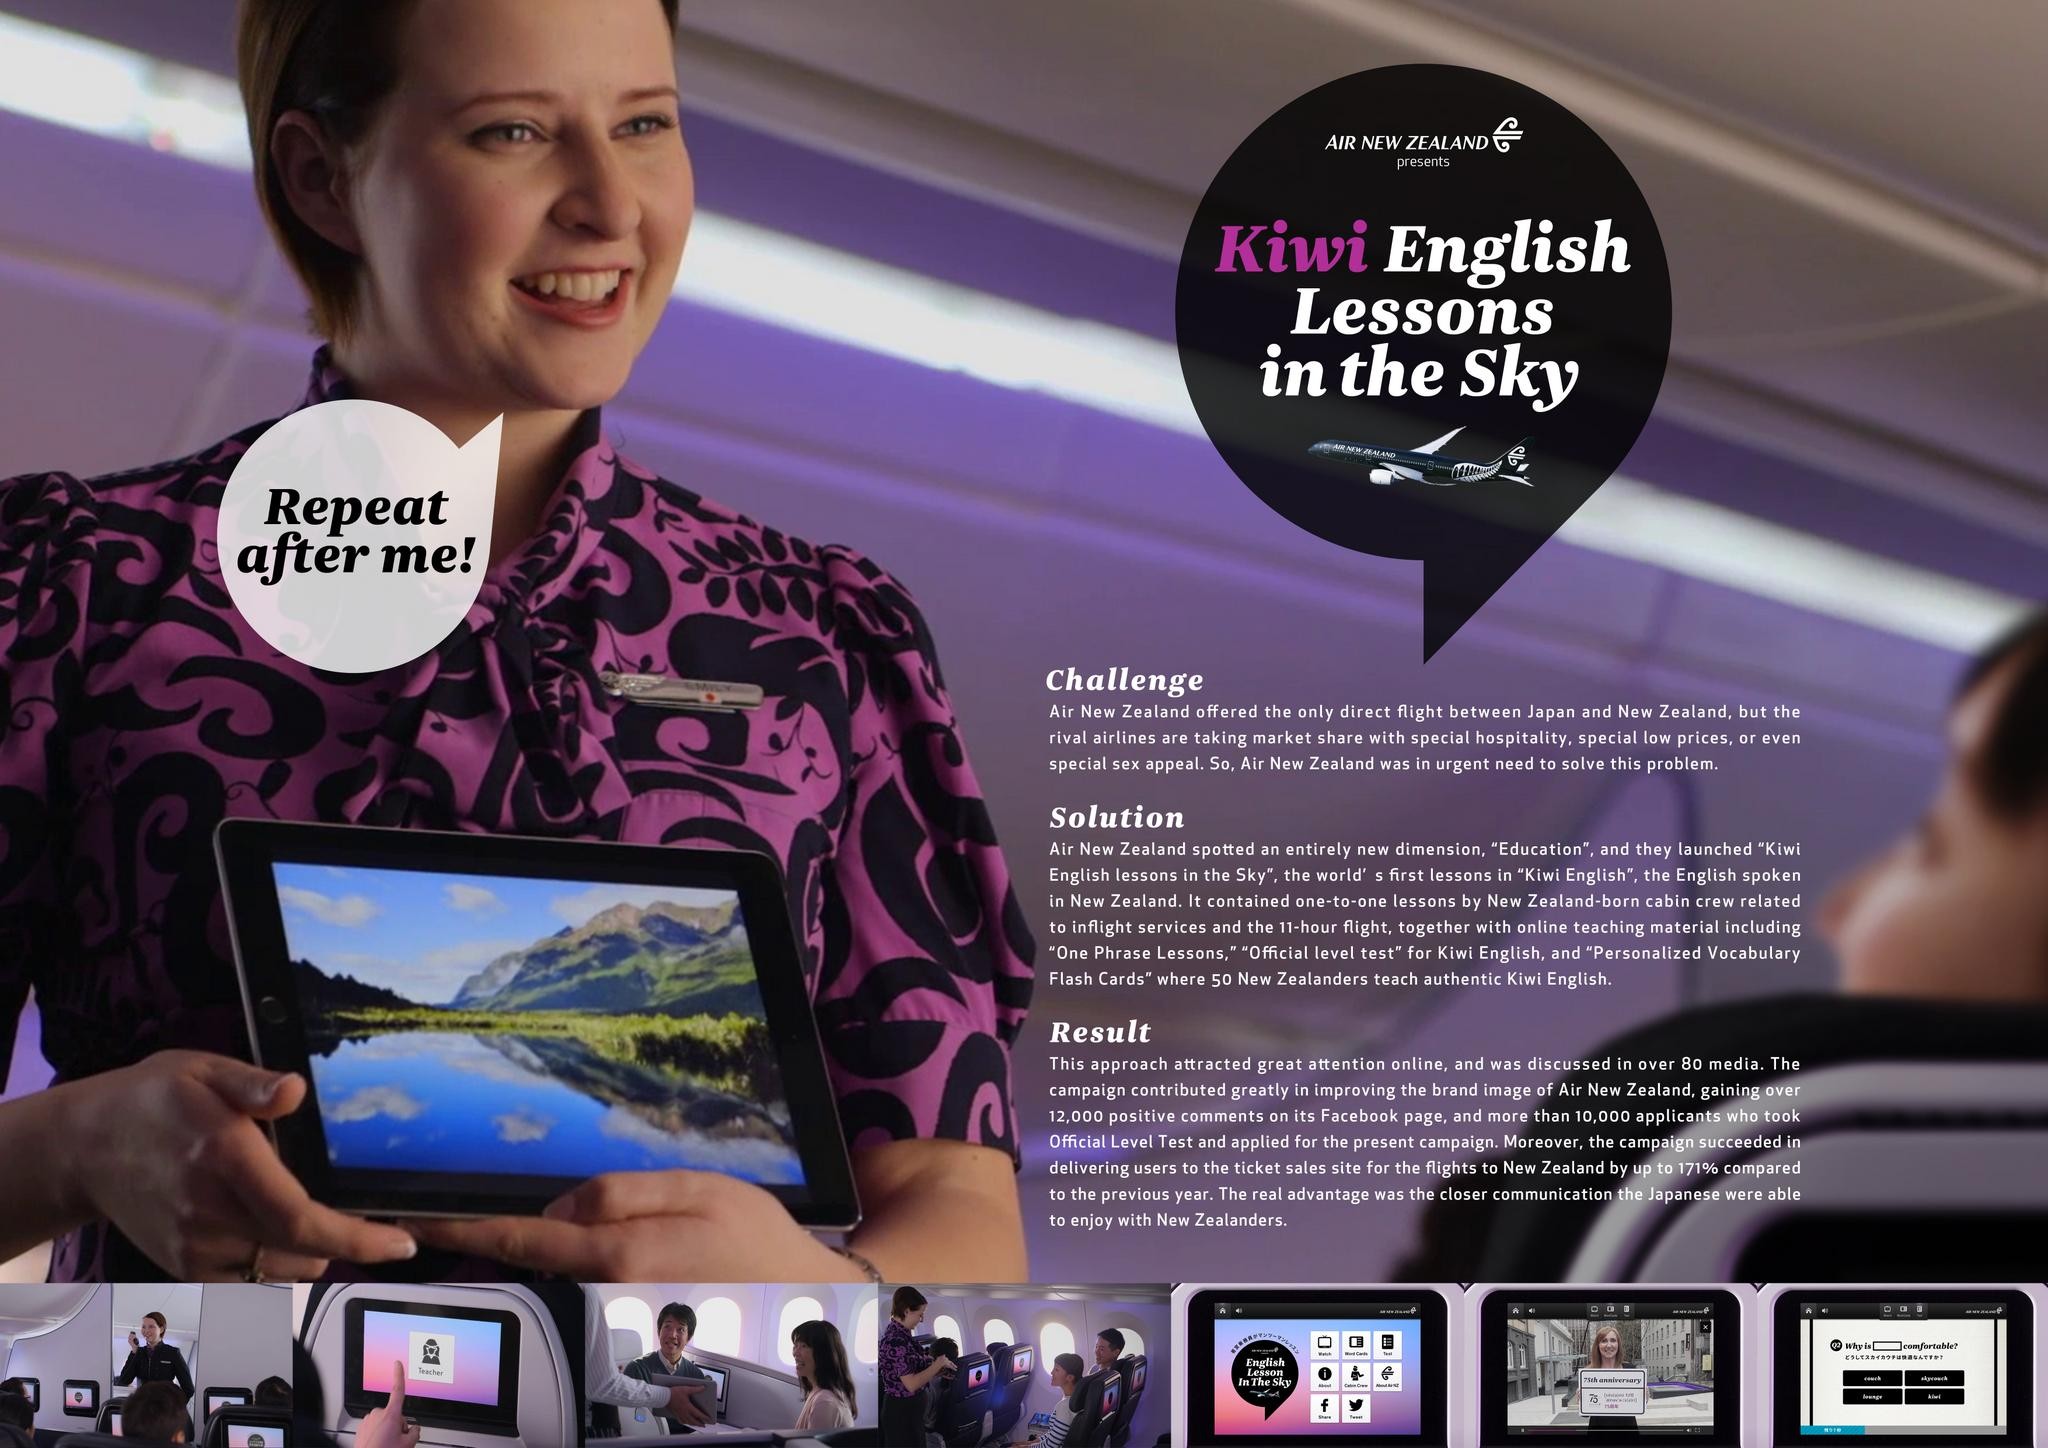 Kiwi English Lessons in the Sky